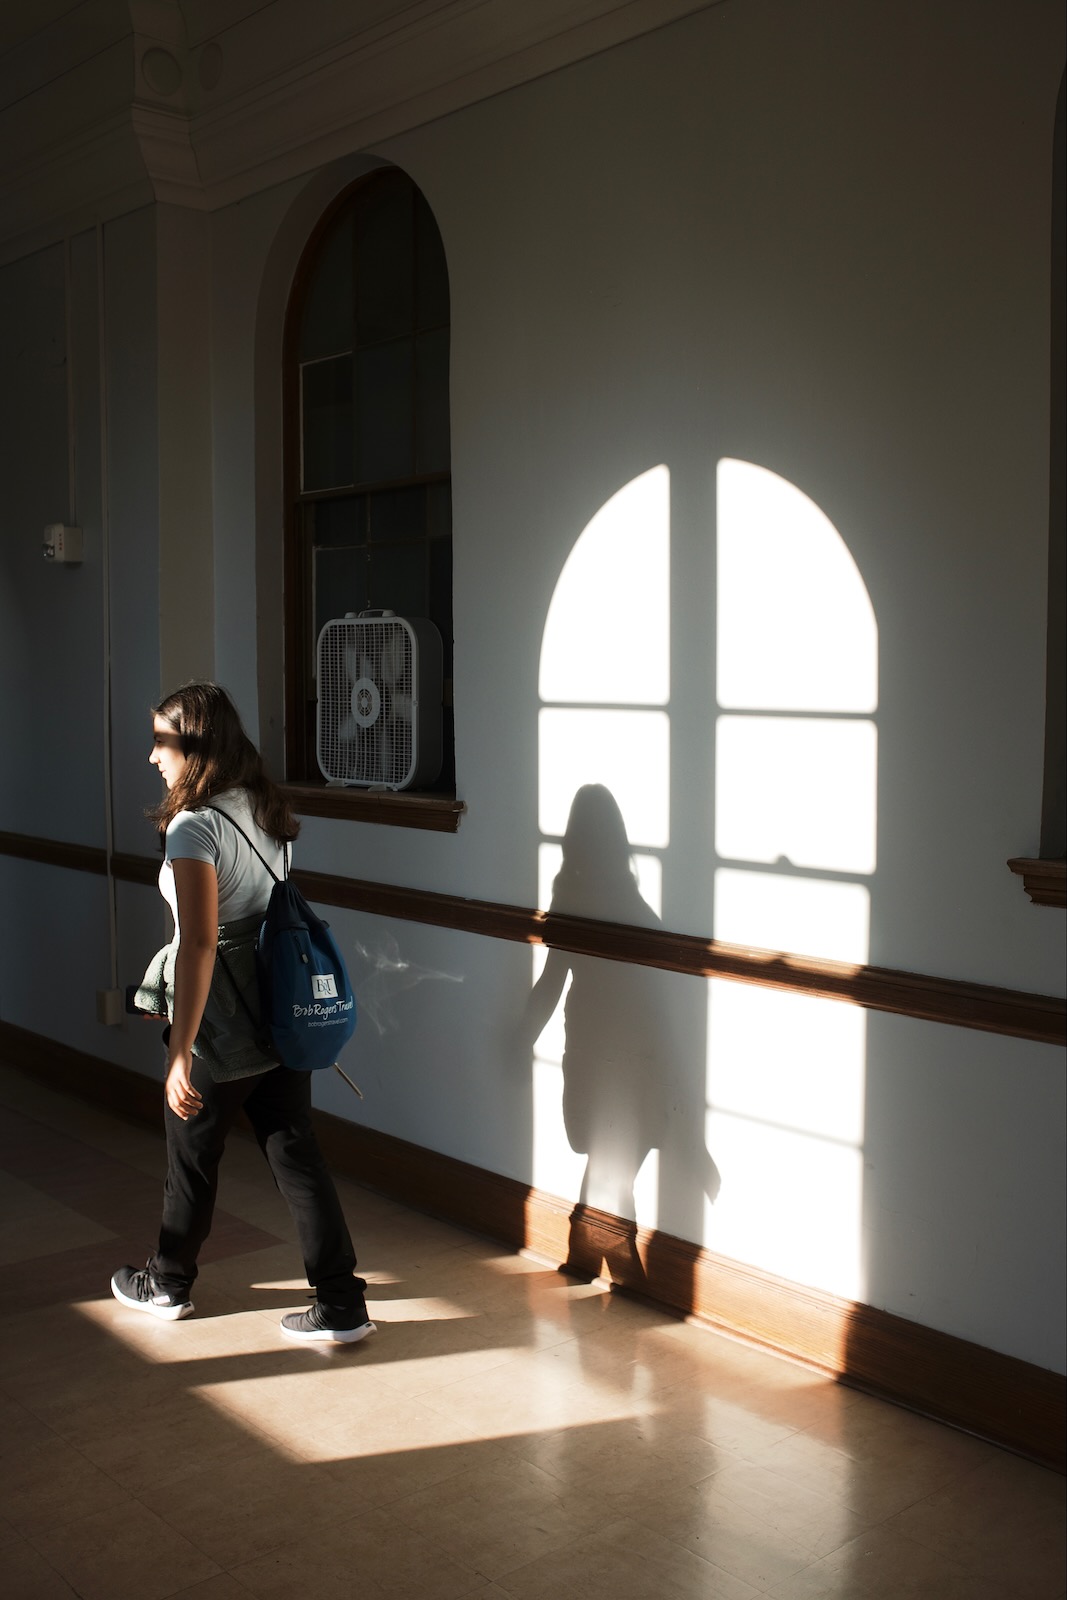 A young woman is framed in the shadow of a hallway window at Vassar College’s Main building.